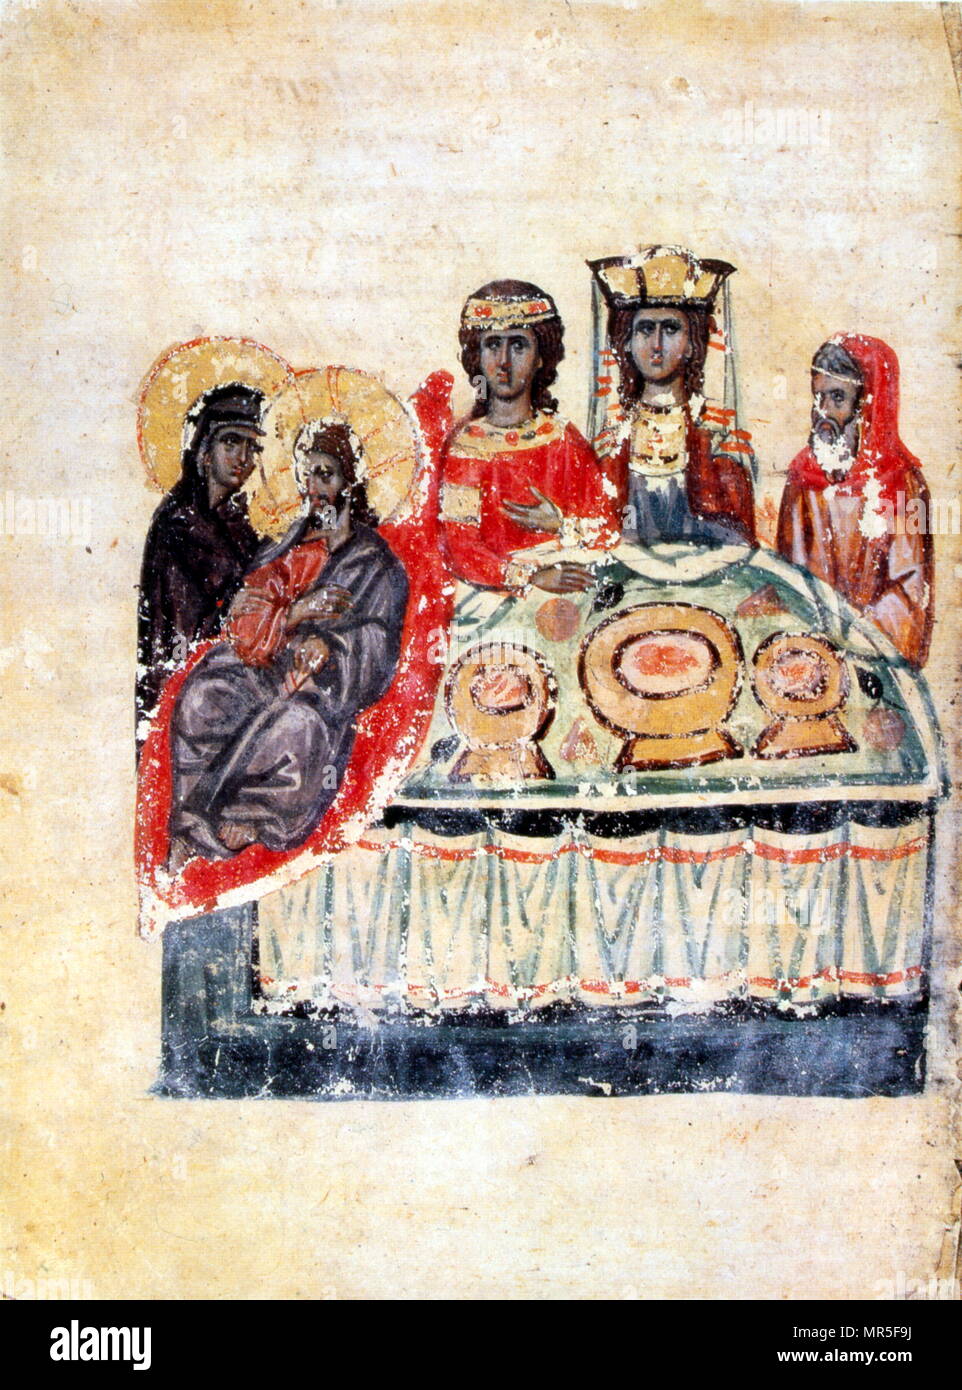 Armenian Christian illustrated manuscript showing the Feast of Cana; the Bible story of the Marriage at Cana, a wedding banquet at which Jesus converts water to wine; 13th century Stock Photo